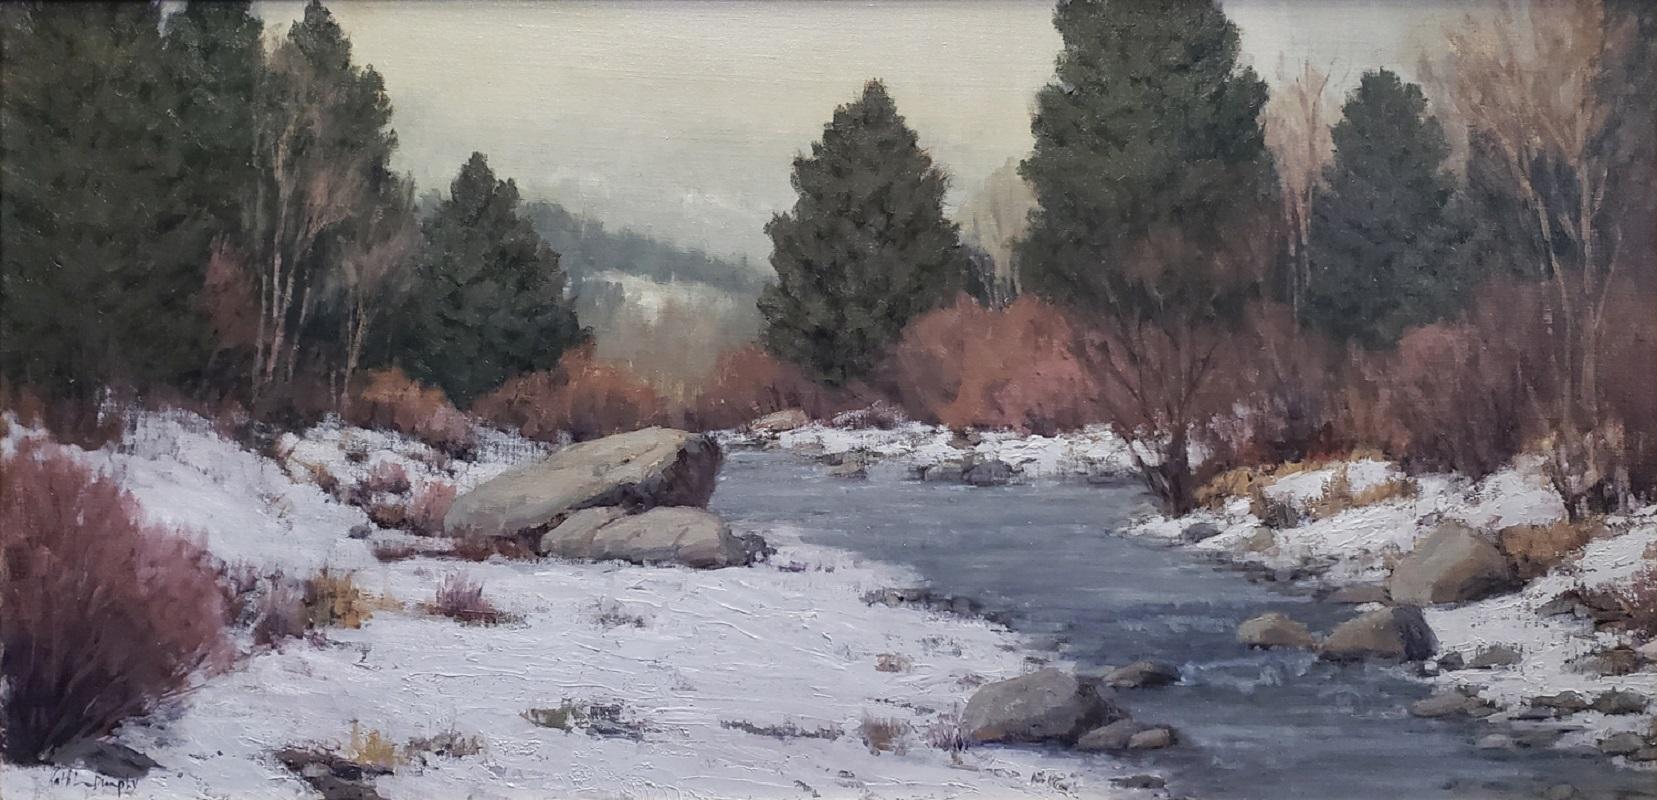 Winter Begins; Truckee River - Painting by Kathleen Dunphy